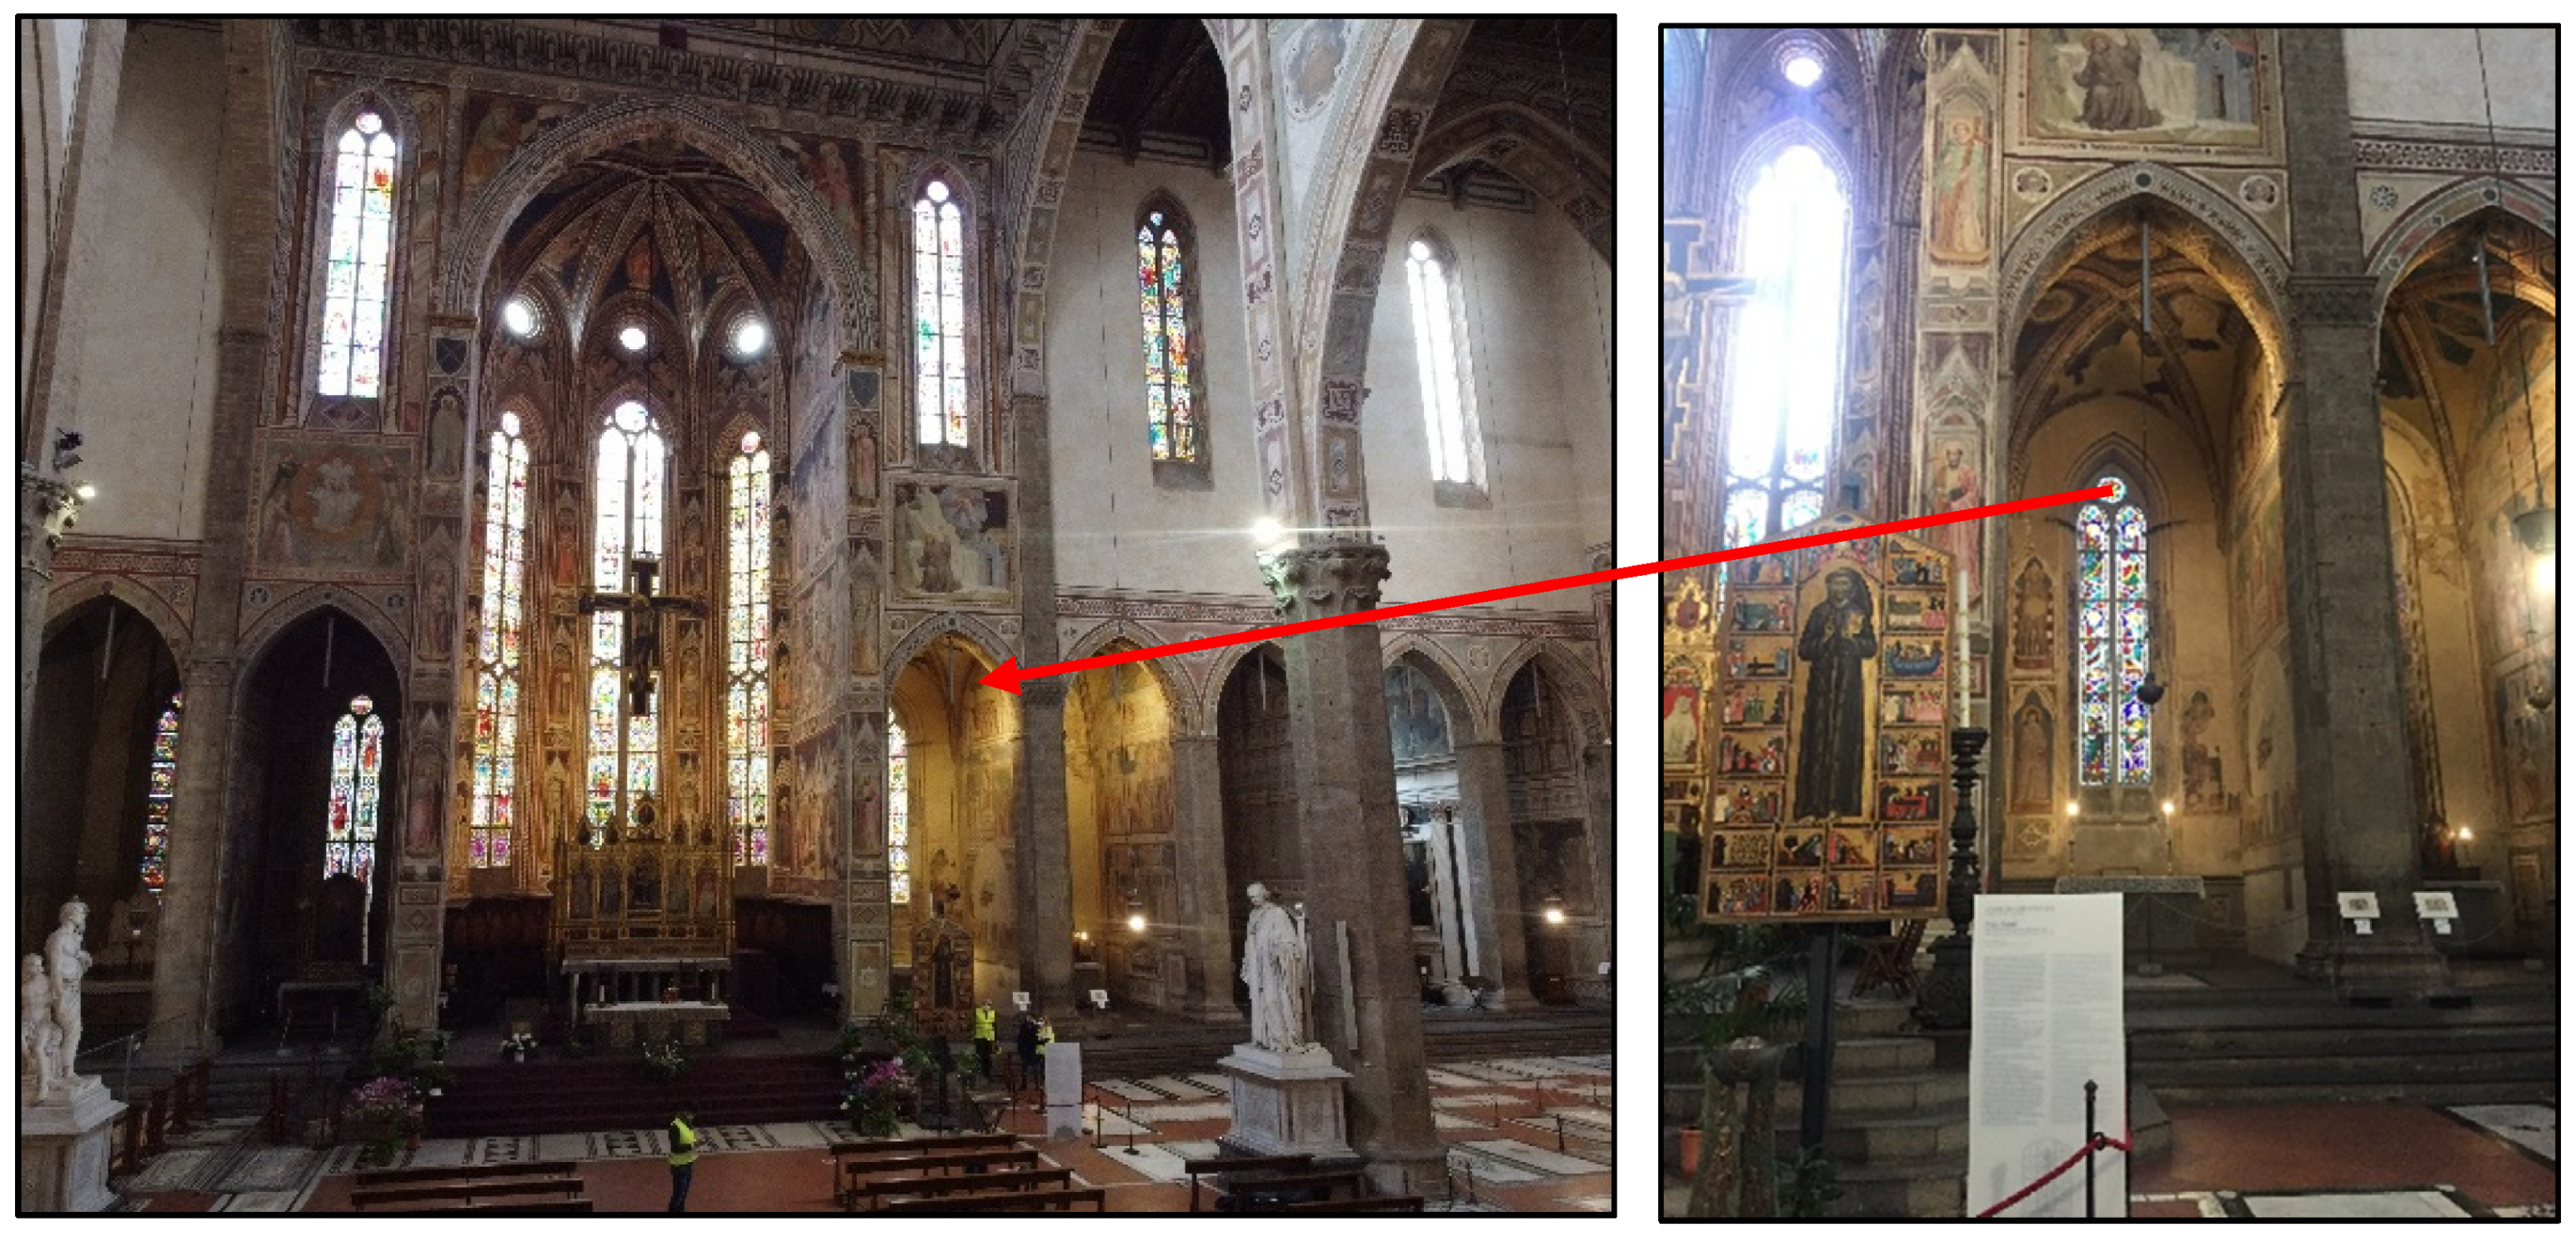 Heritage | Free Full-Text | 3D HBIM Model and Full Contactless GPR  Tomography: An Experimental Application on the Historic Walls That Support  Giotto&rsquo;s Mural Paintings, Santa Croce Basilica, Florence&mdash;Italy